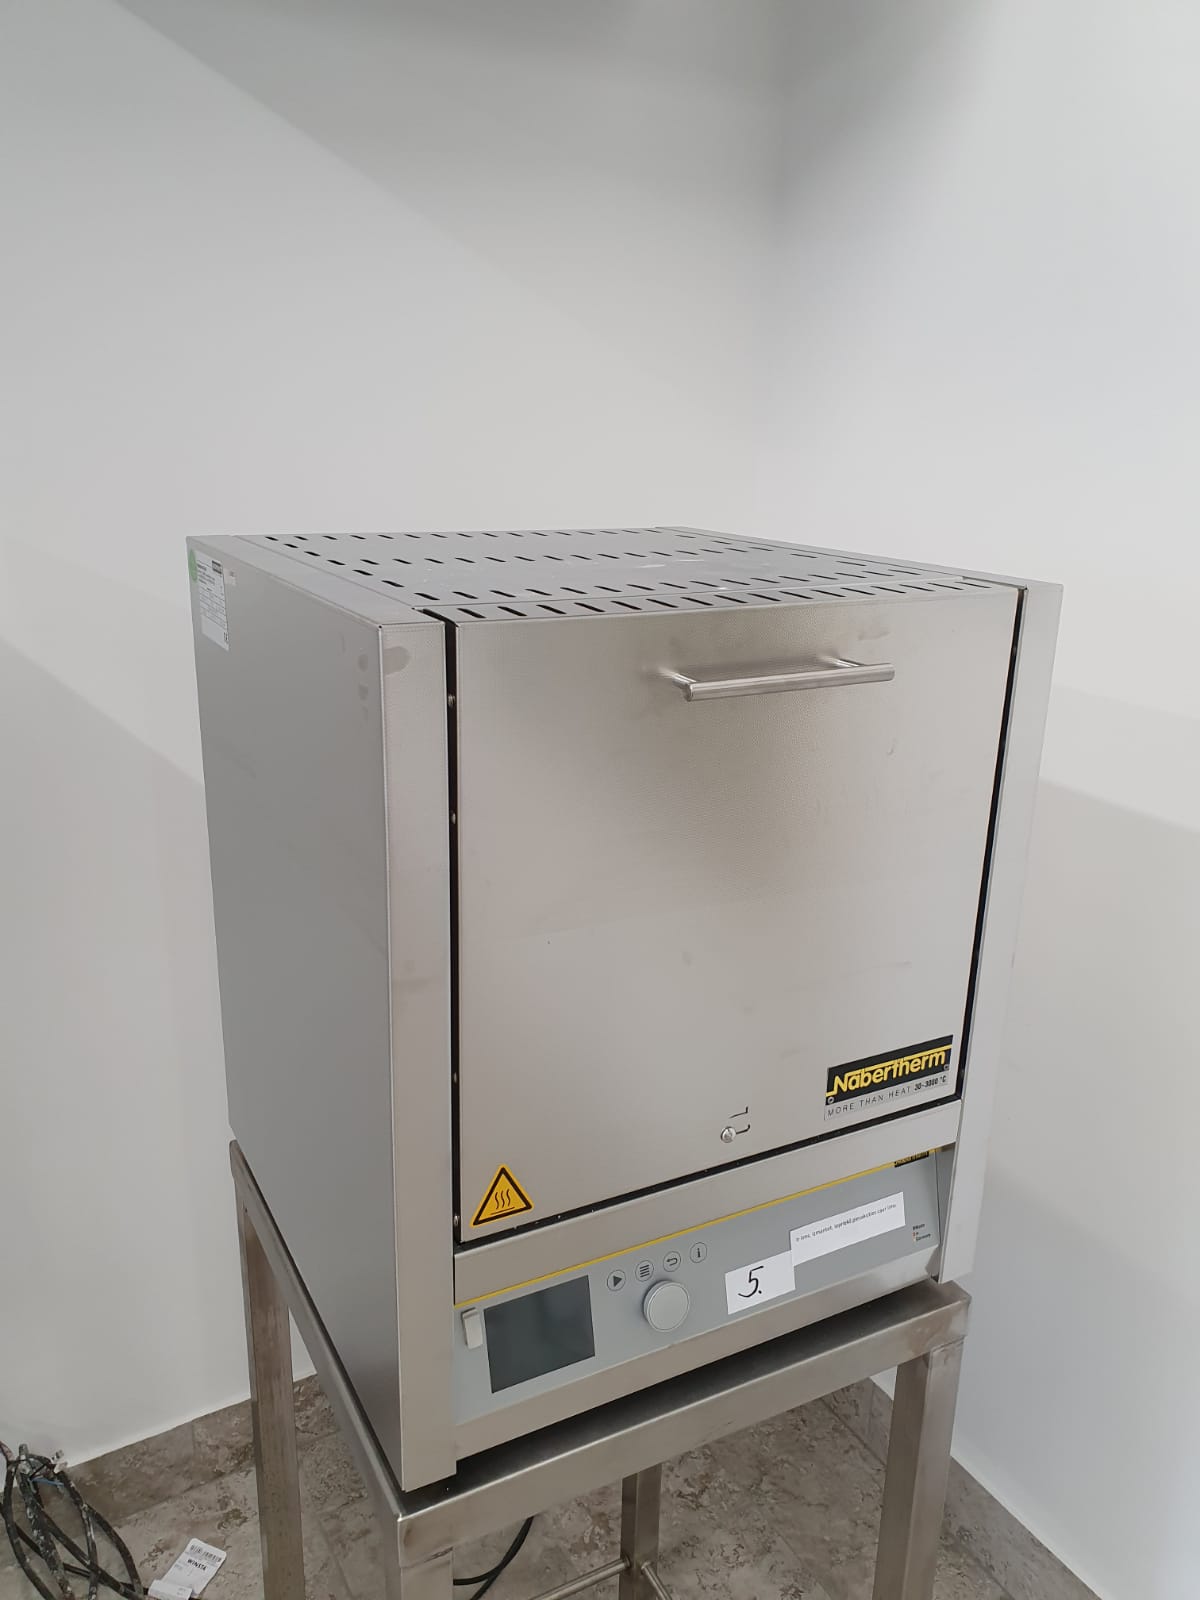 Picture of High-temperature furnace 1300 C NR.5.